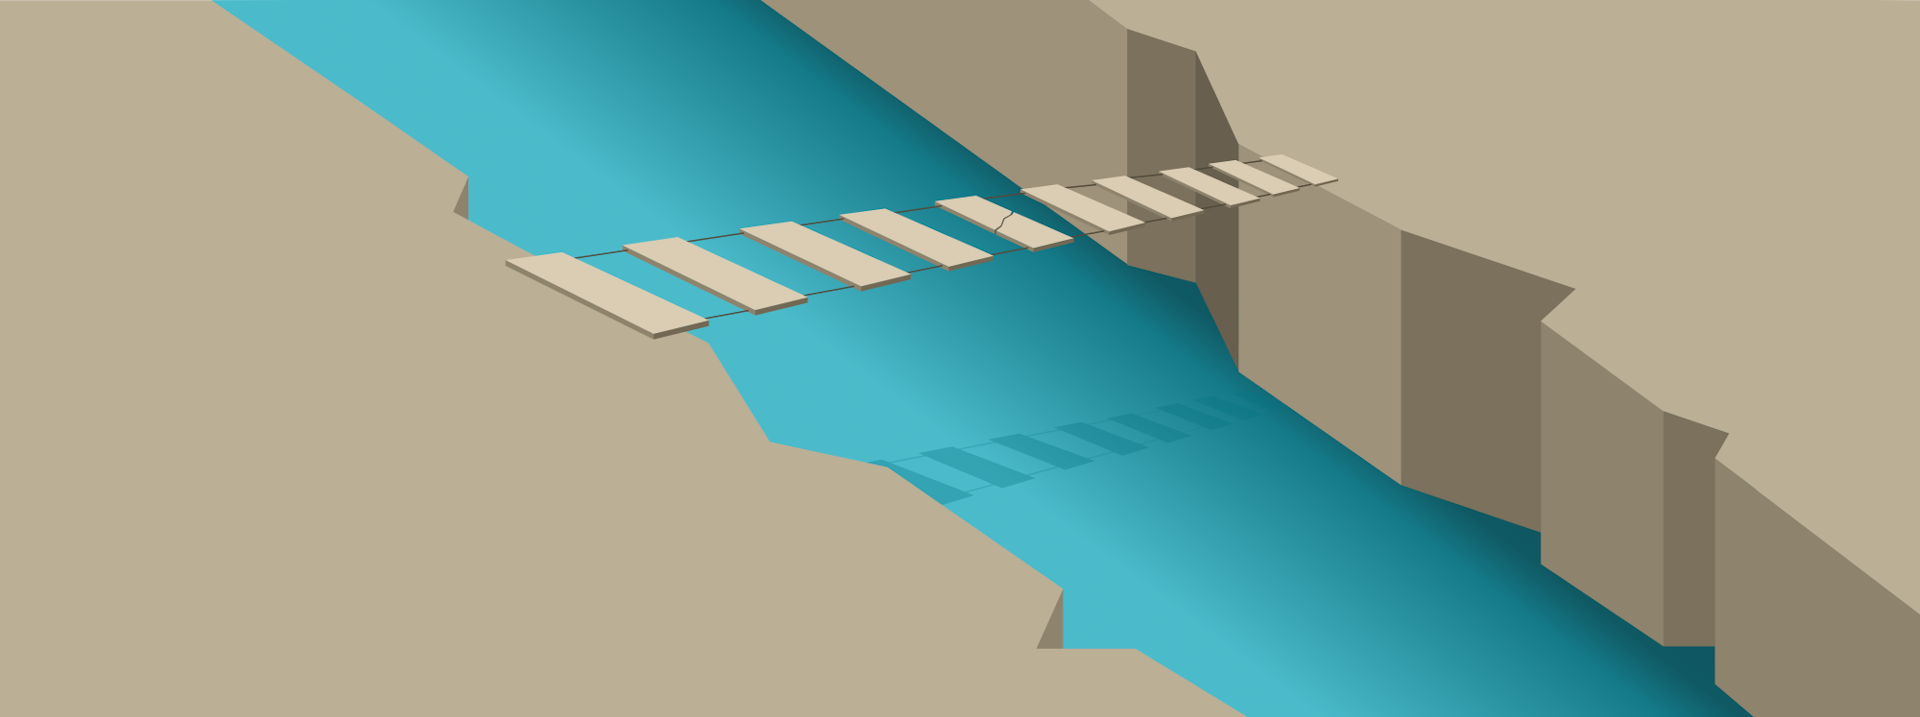 Illustration of a rope bridge across a canyon river.